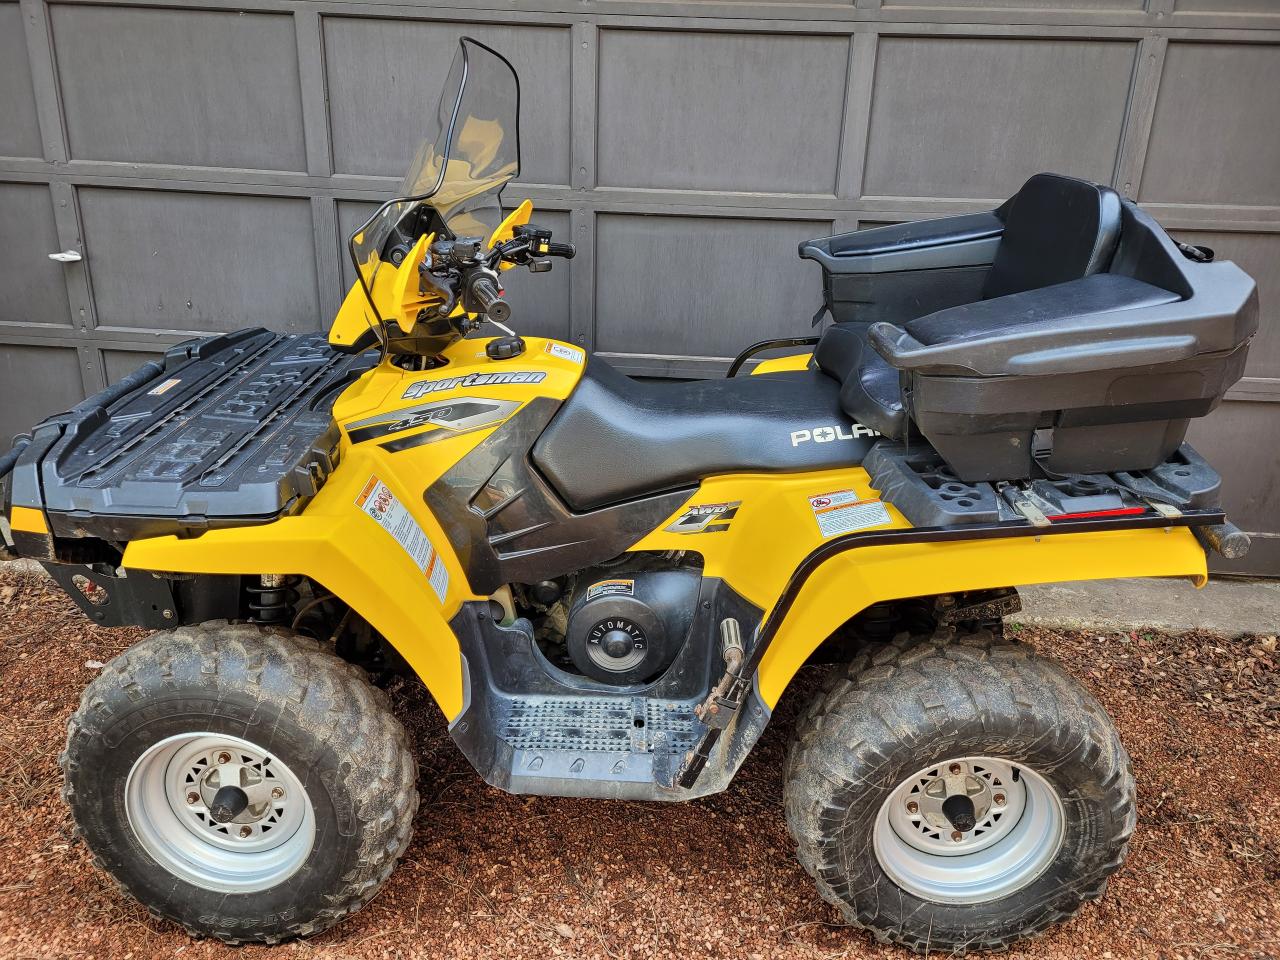 2006 Polaris Sportsman 450 *1-Owner* Financing Available & Trades Welcome! - Photo #1